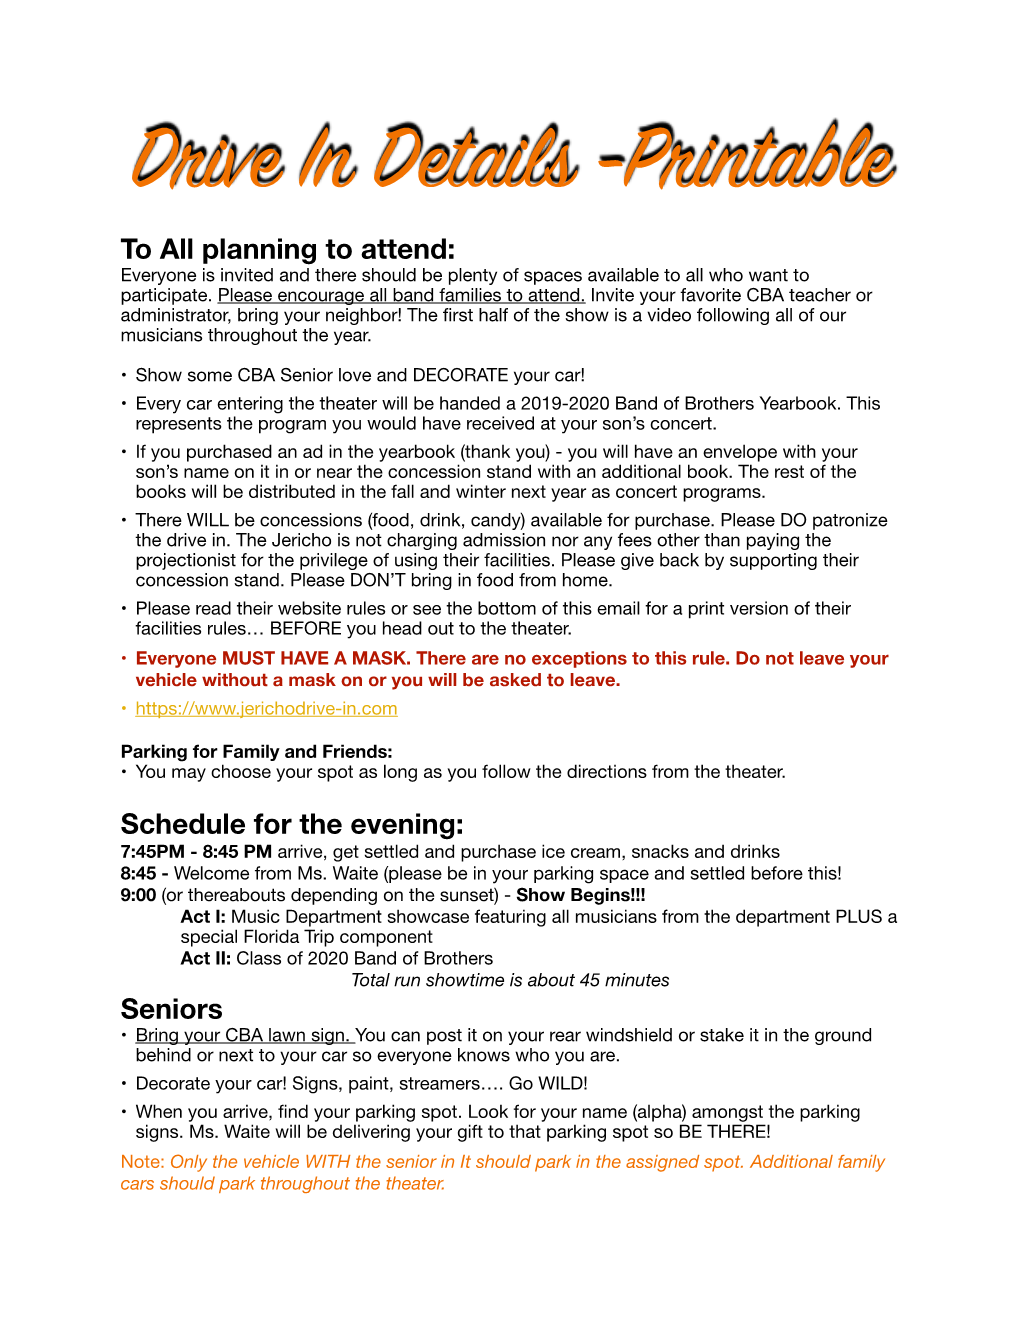 Drive in Details and Rules Printable